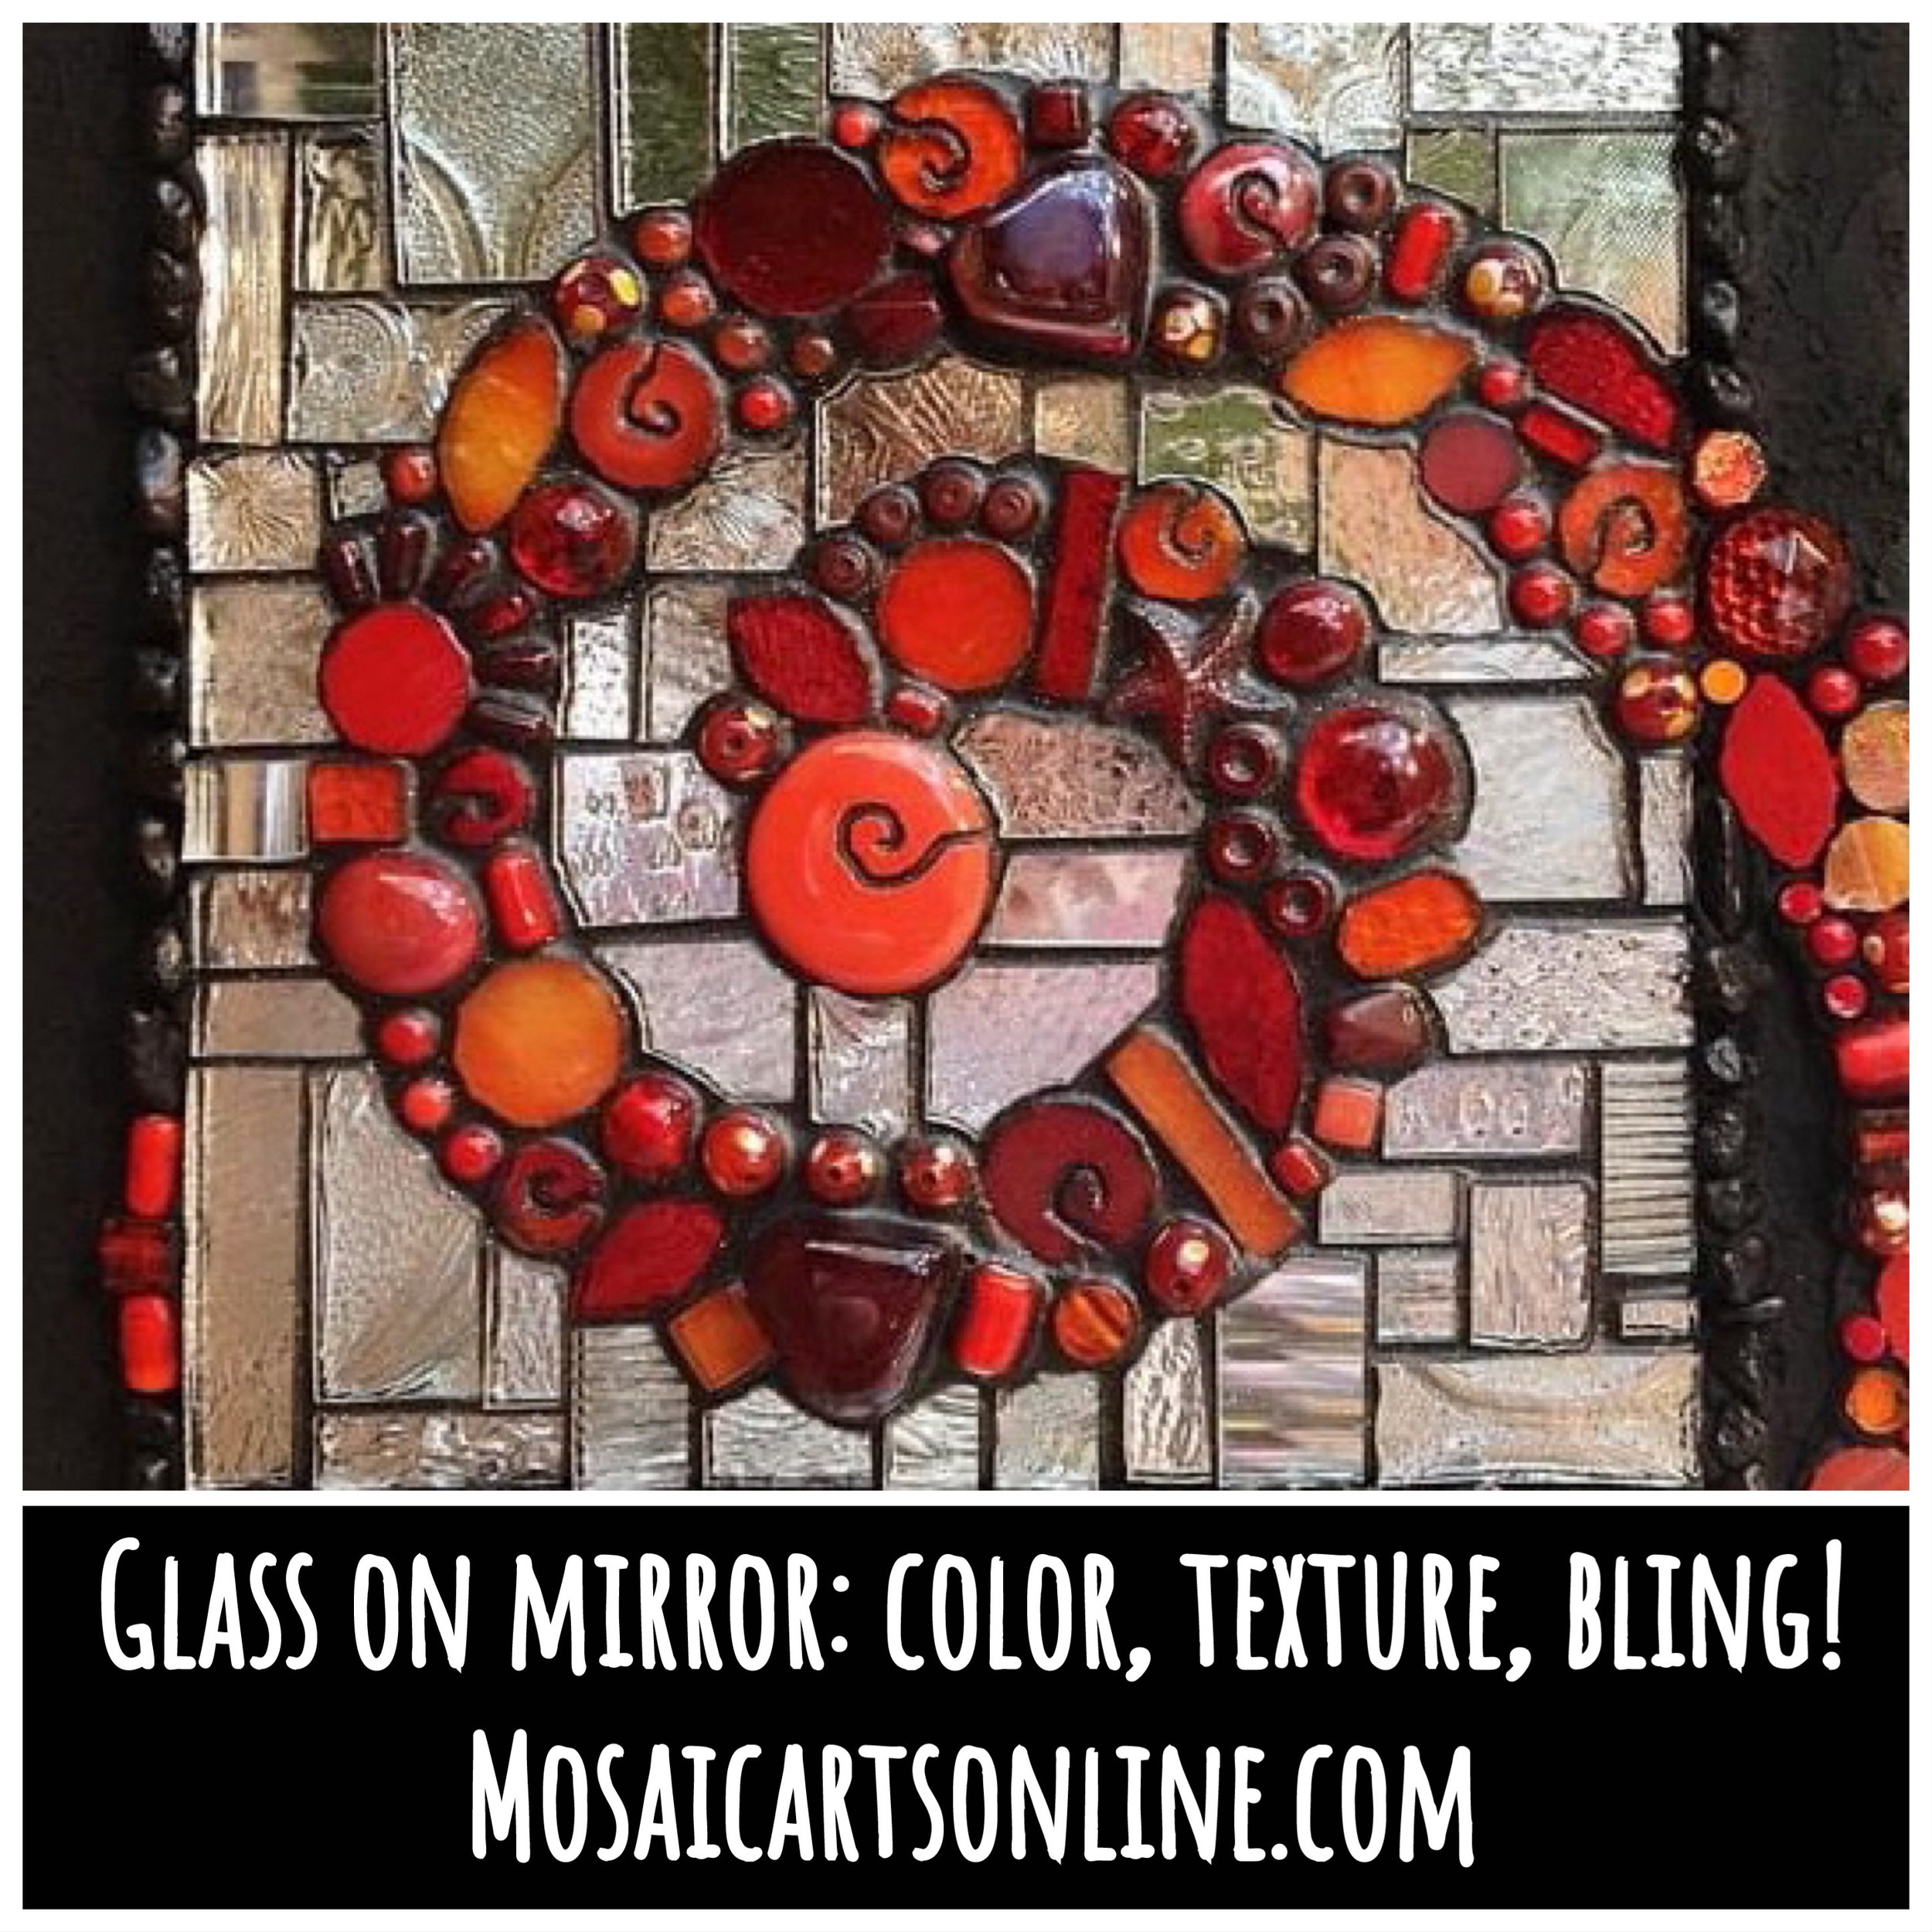 APOXIE SCULPT FOR YOUR MOSAIC ART  How to Use + Mix, Plus Other Helpful  Tips! 